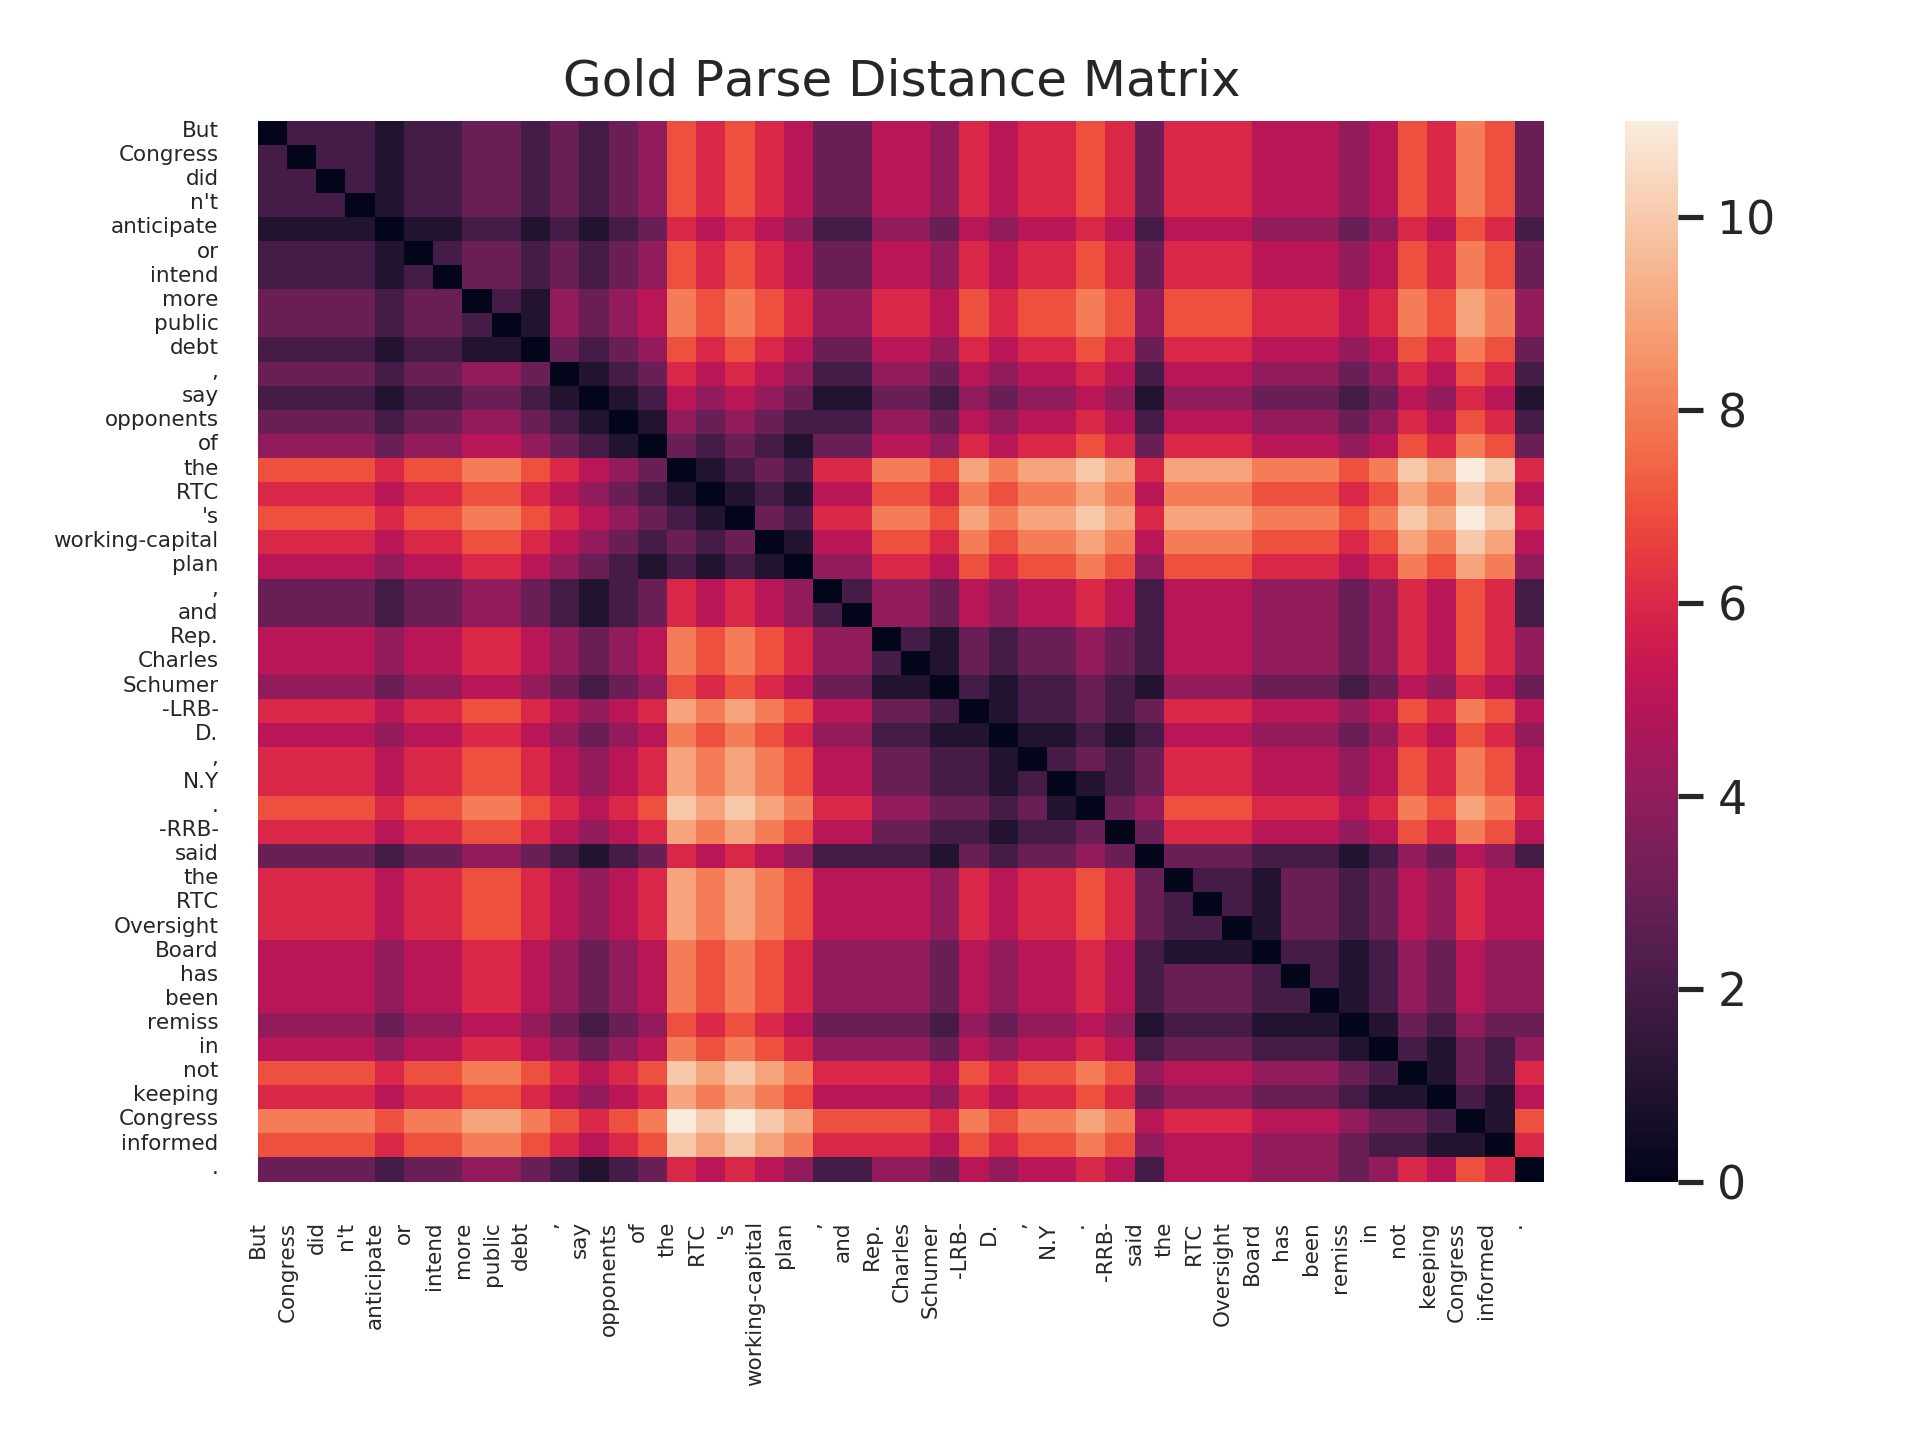 A distance matrix defined by a human-constructed parse tree